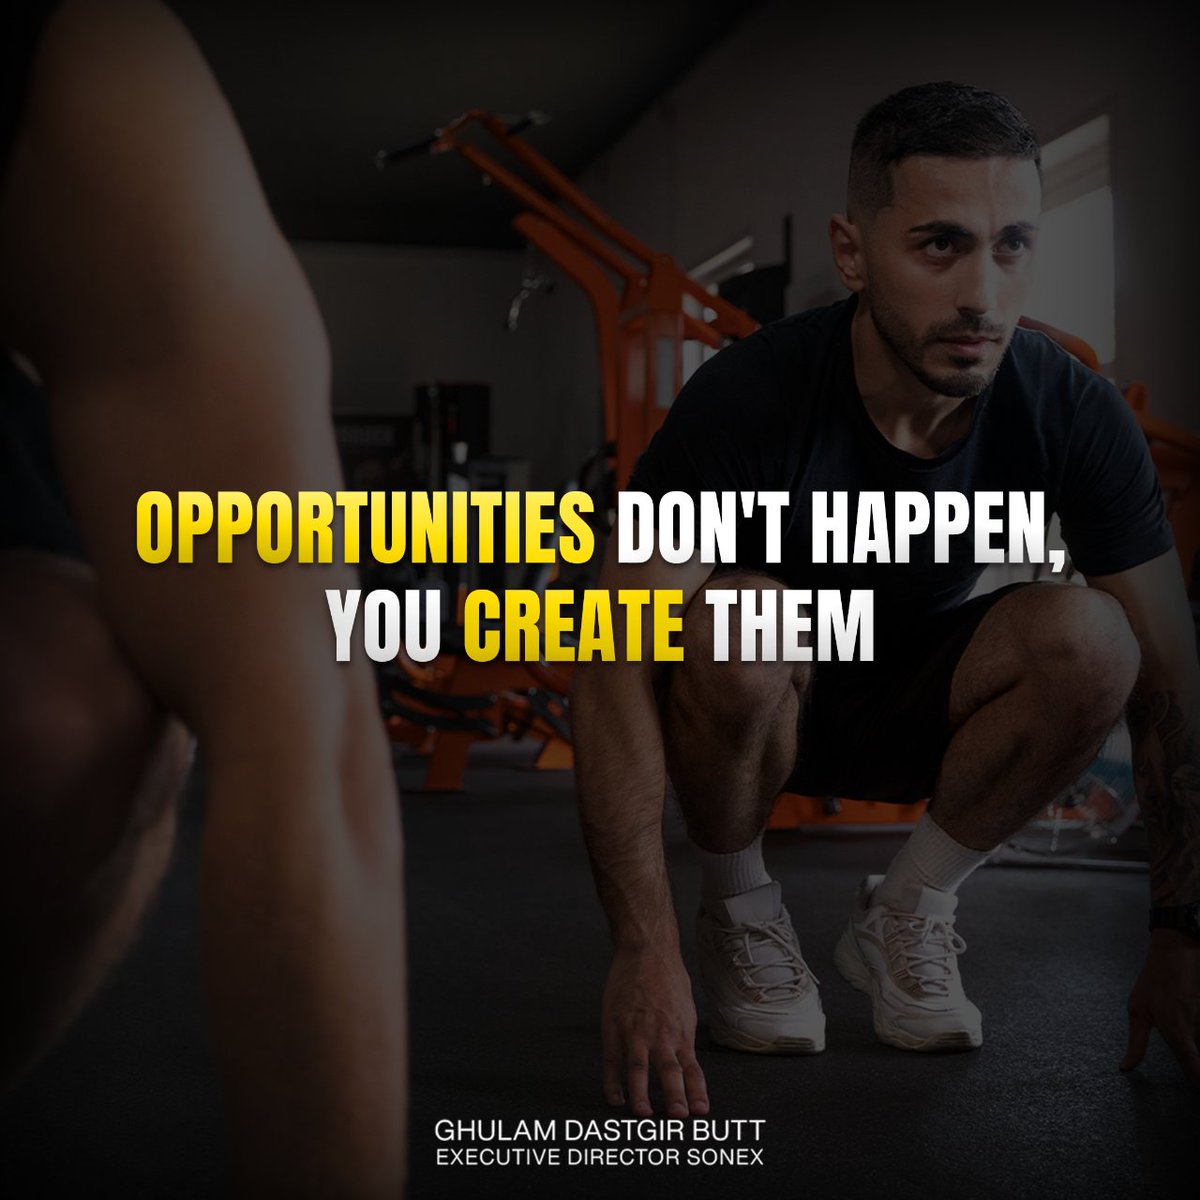 Take the reins of your destiny and forge the path to success by proactively seeking and creating opportunities that align with your goals  & aspirations
#GhulamDastgirButt #youngentrepreneur #leadership #motivation #risktaker #journey #challenge #success #SelfDesign #YouAreUnique